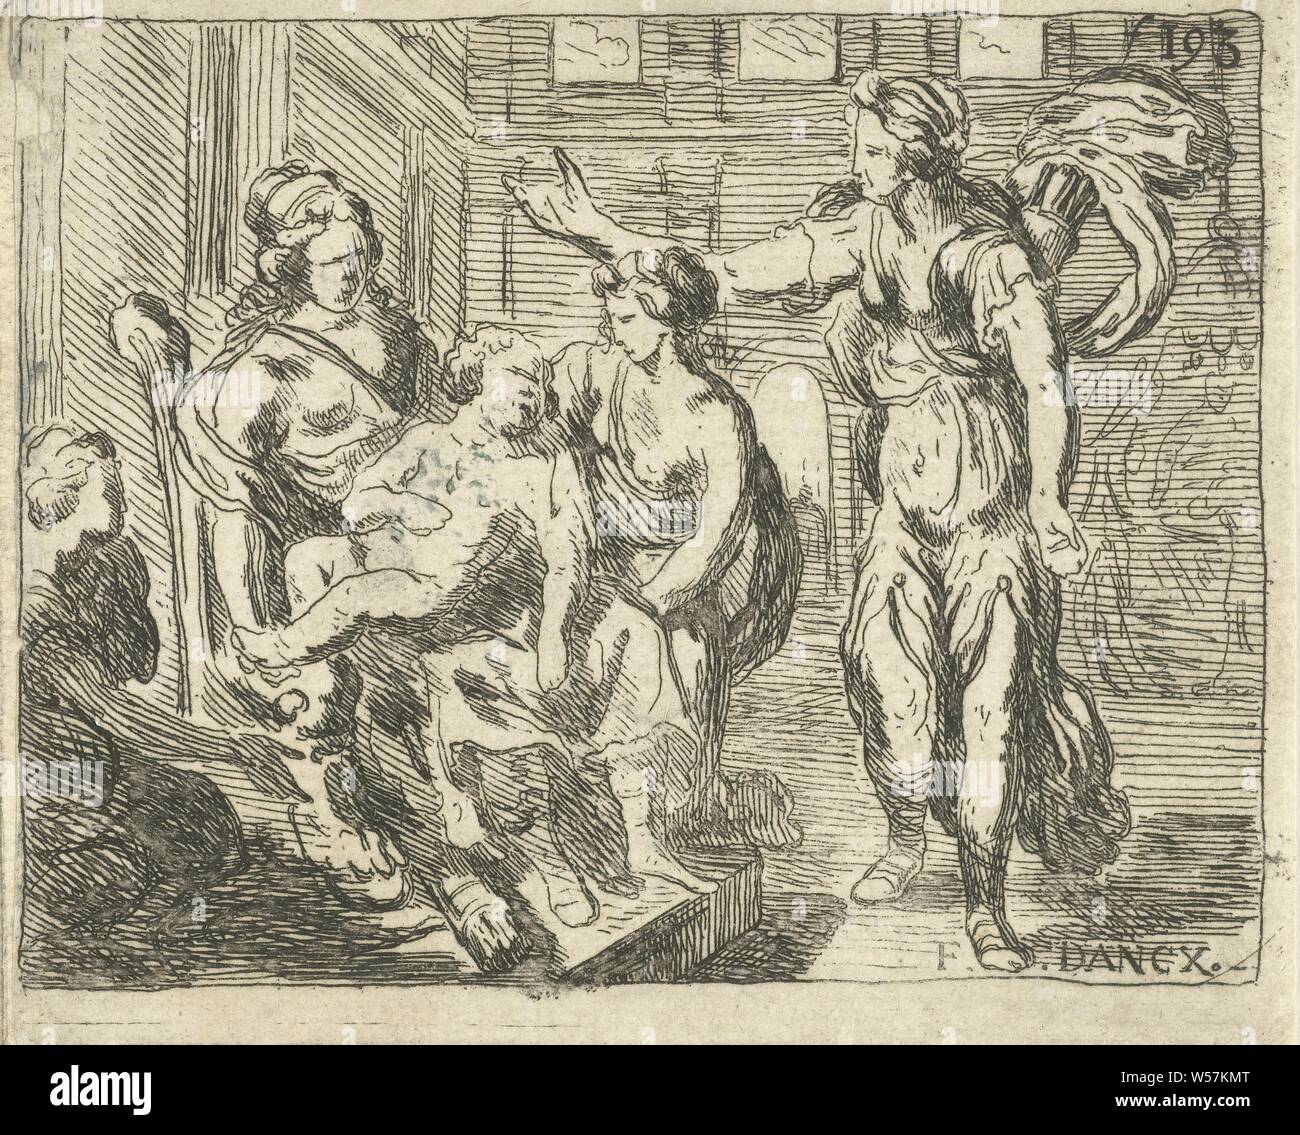 Birth of Hercules, birth of Hercules and his twin brother Iphicles, Juno delays the birth by sitting outside Alcmene's with with crossed knees and fingers, Francoys Dancx (mentioned on object), 1646 - 1703, paper, etching, h 69 mm × w 84 mm Stock Photo